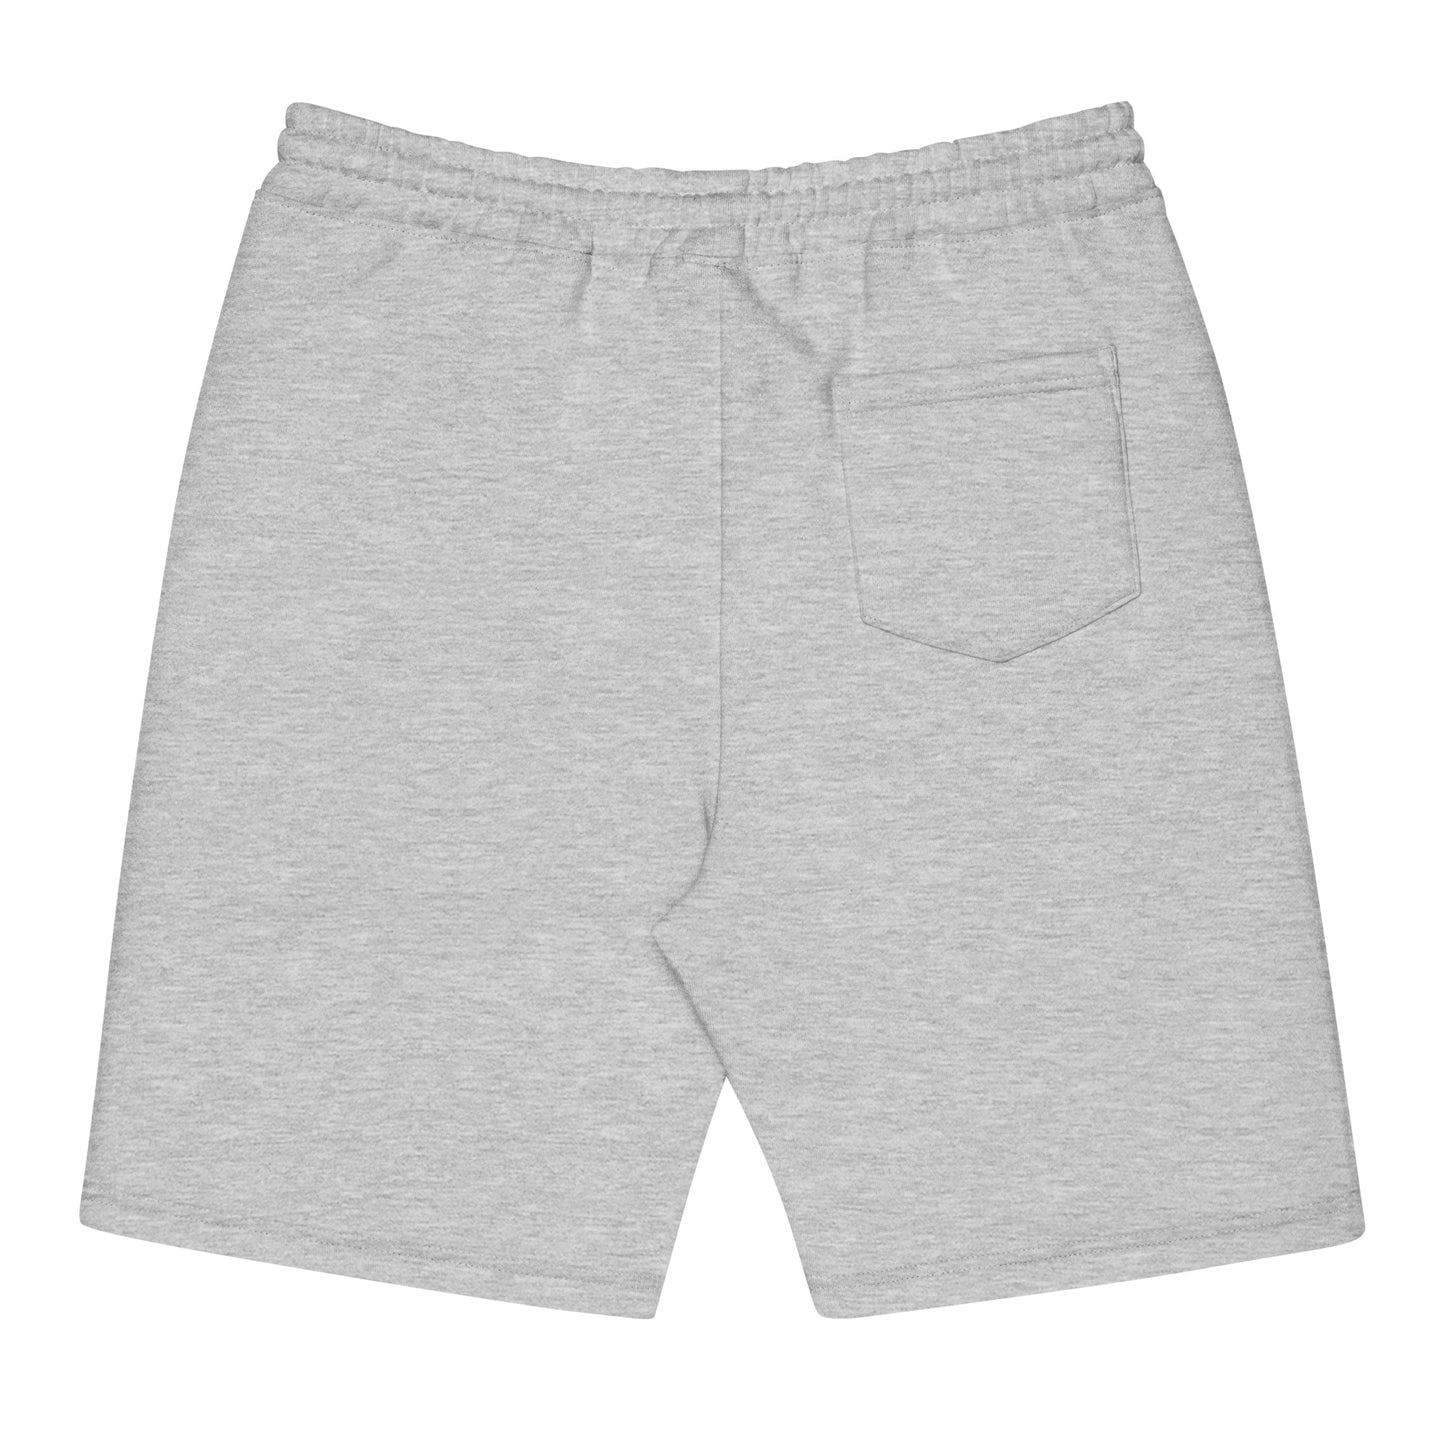 Embroidered Logo Shorts - Gray